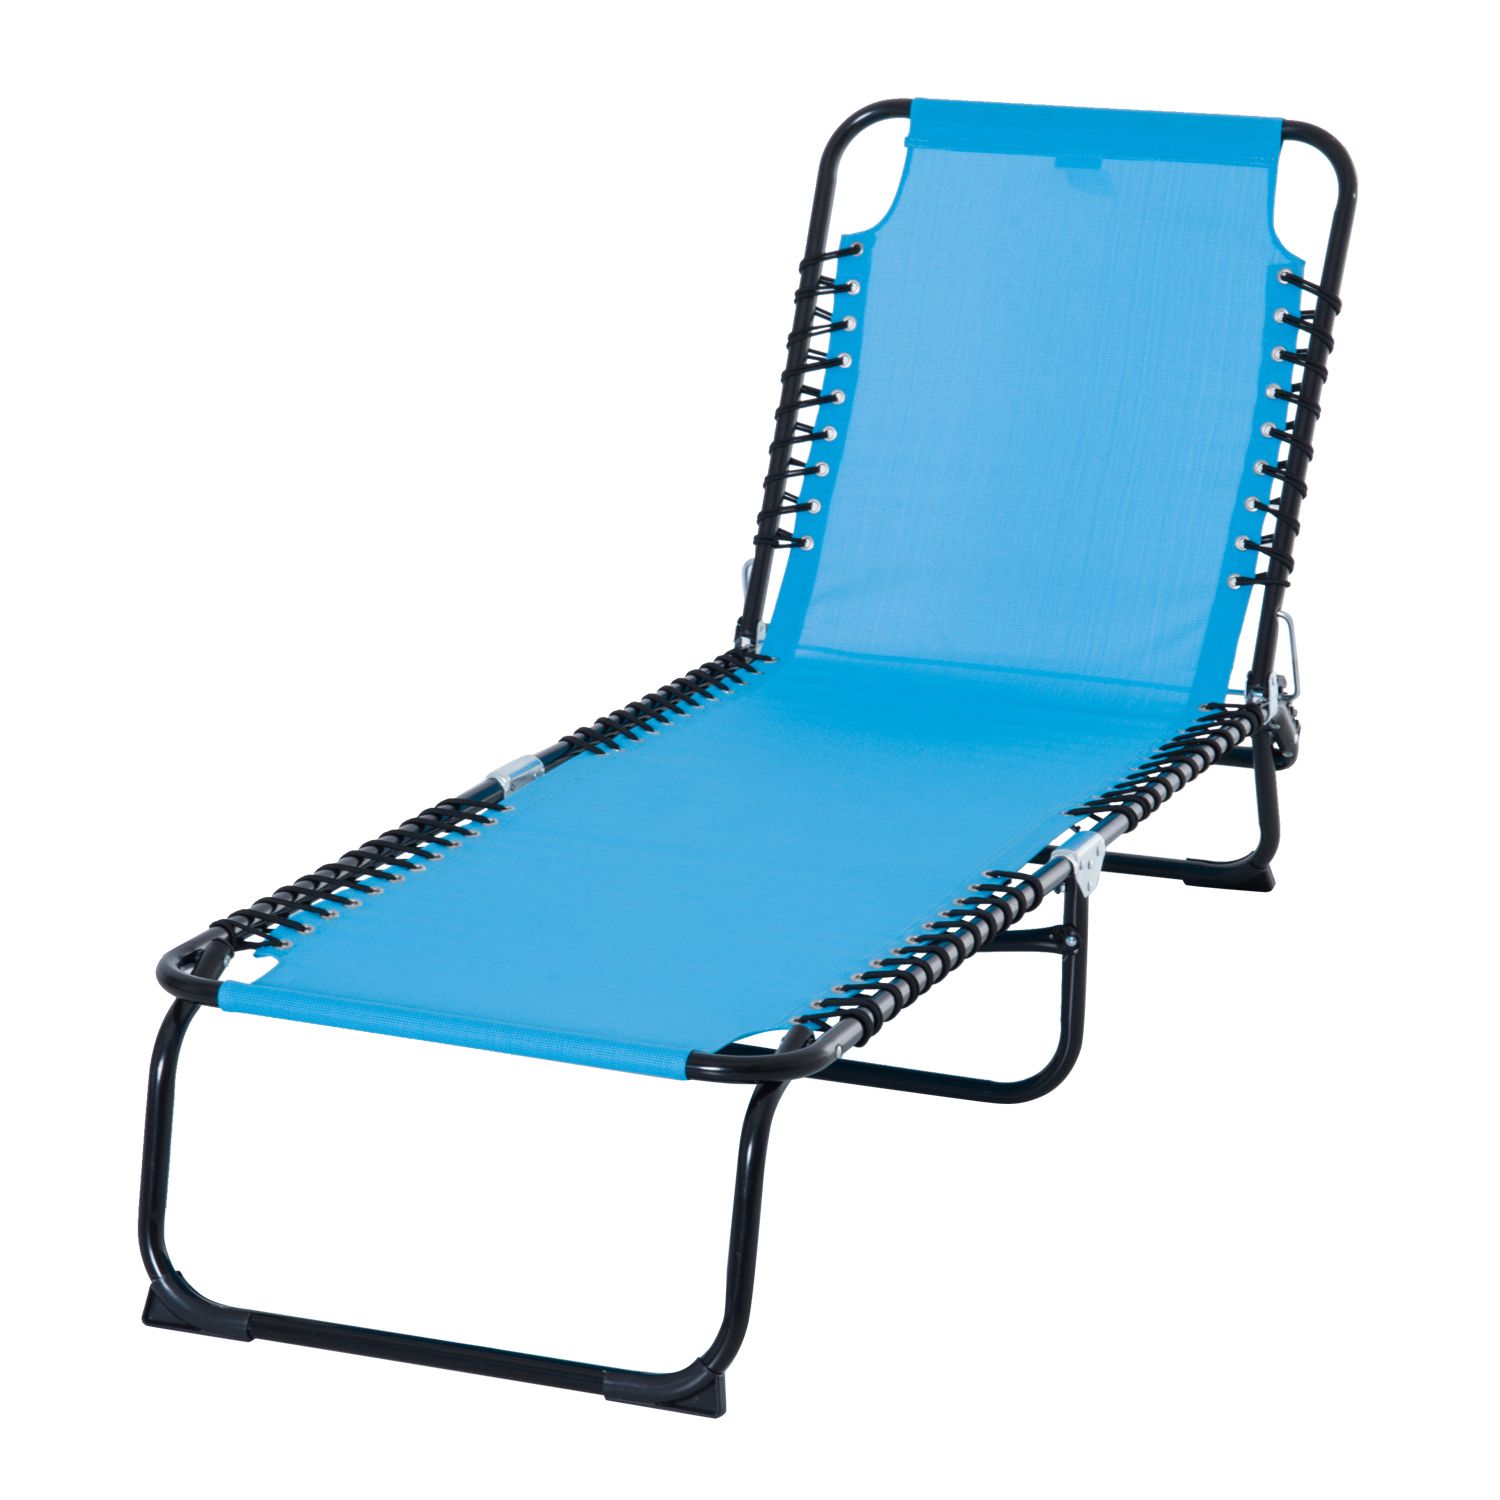 3 Position Portable Reclining Beach Chaise Lounges Regarding Well Known Outsunny 3 Position Portable Reclining Beach Chaise Lounge Folding Chair  Outdoor Patio – Light Blue (View 2 of 25)